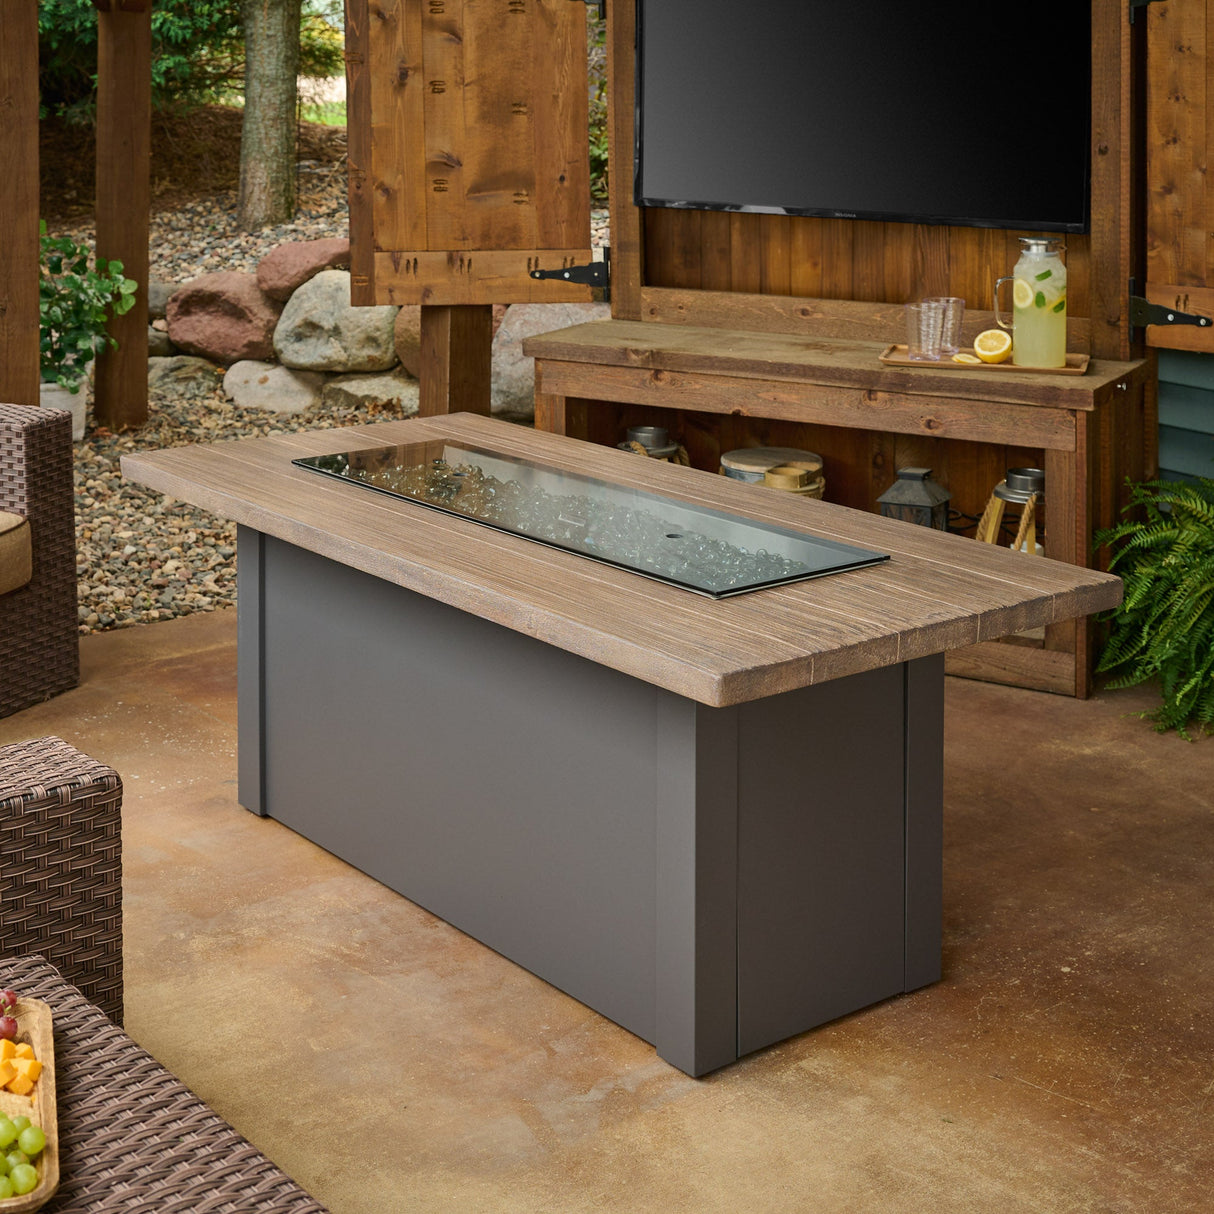 The Havenwood Linear Gas Fire Pit Table with a Driftwood top and Graphite Grey base being used as a table with its cover placed on the burner